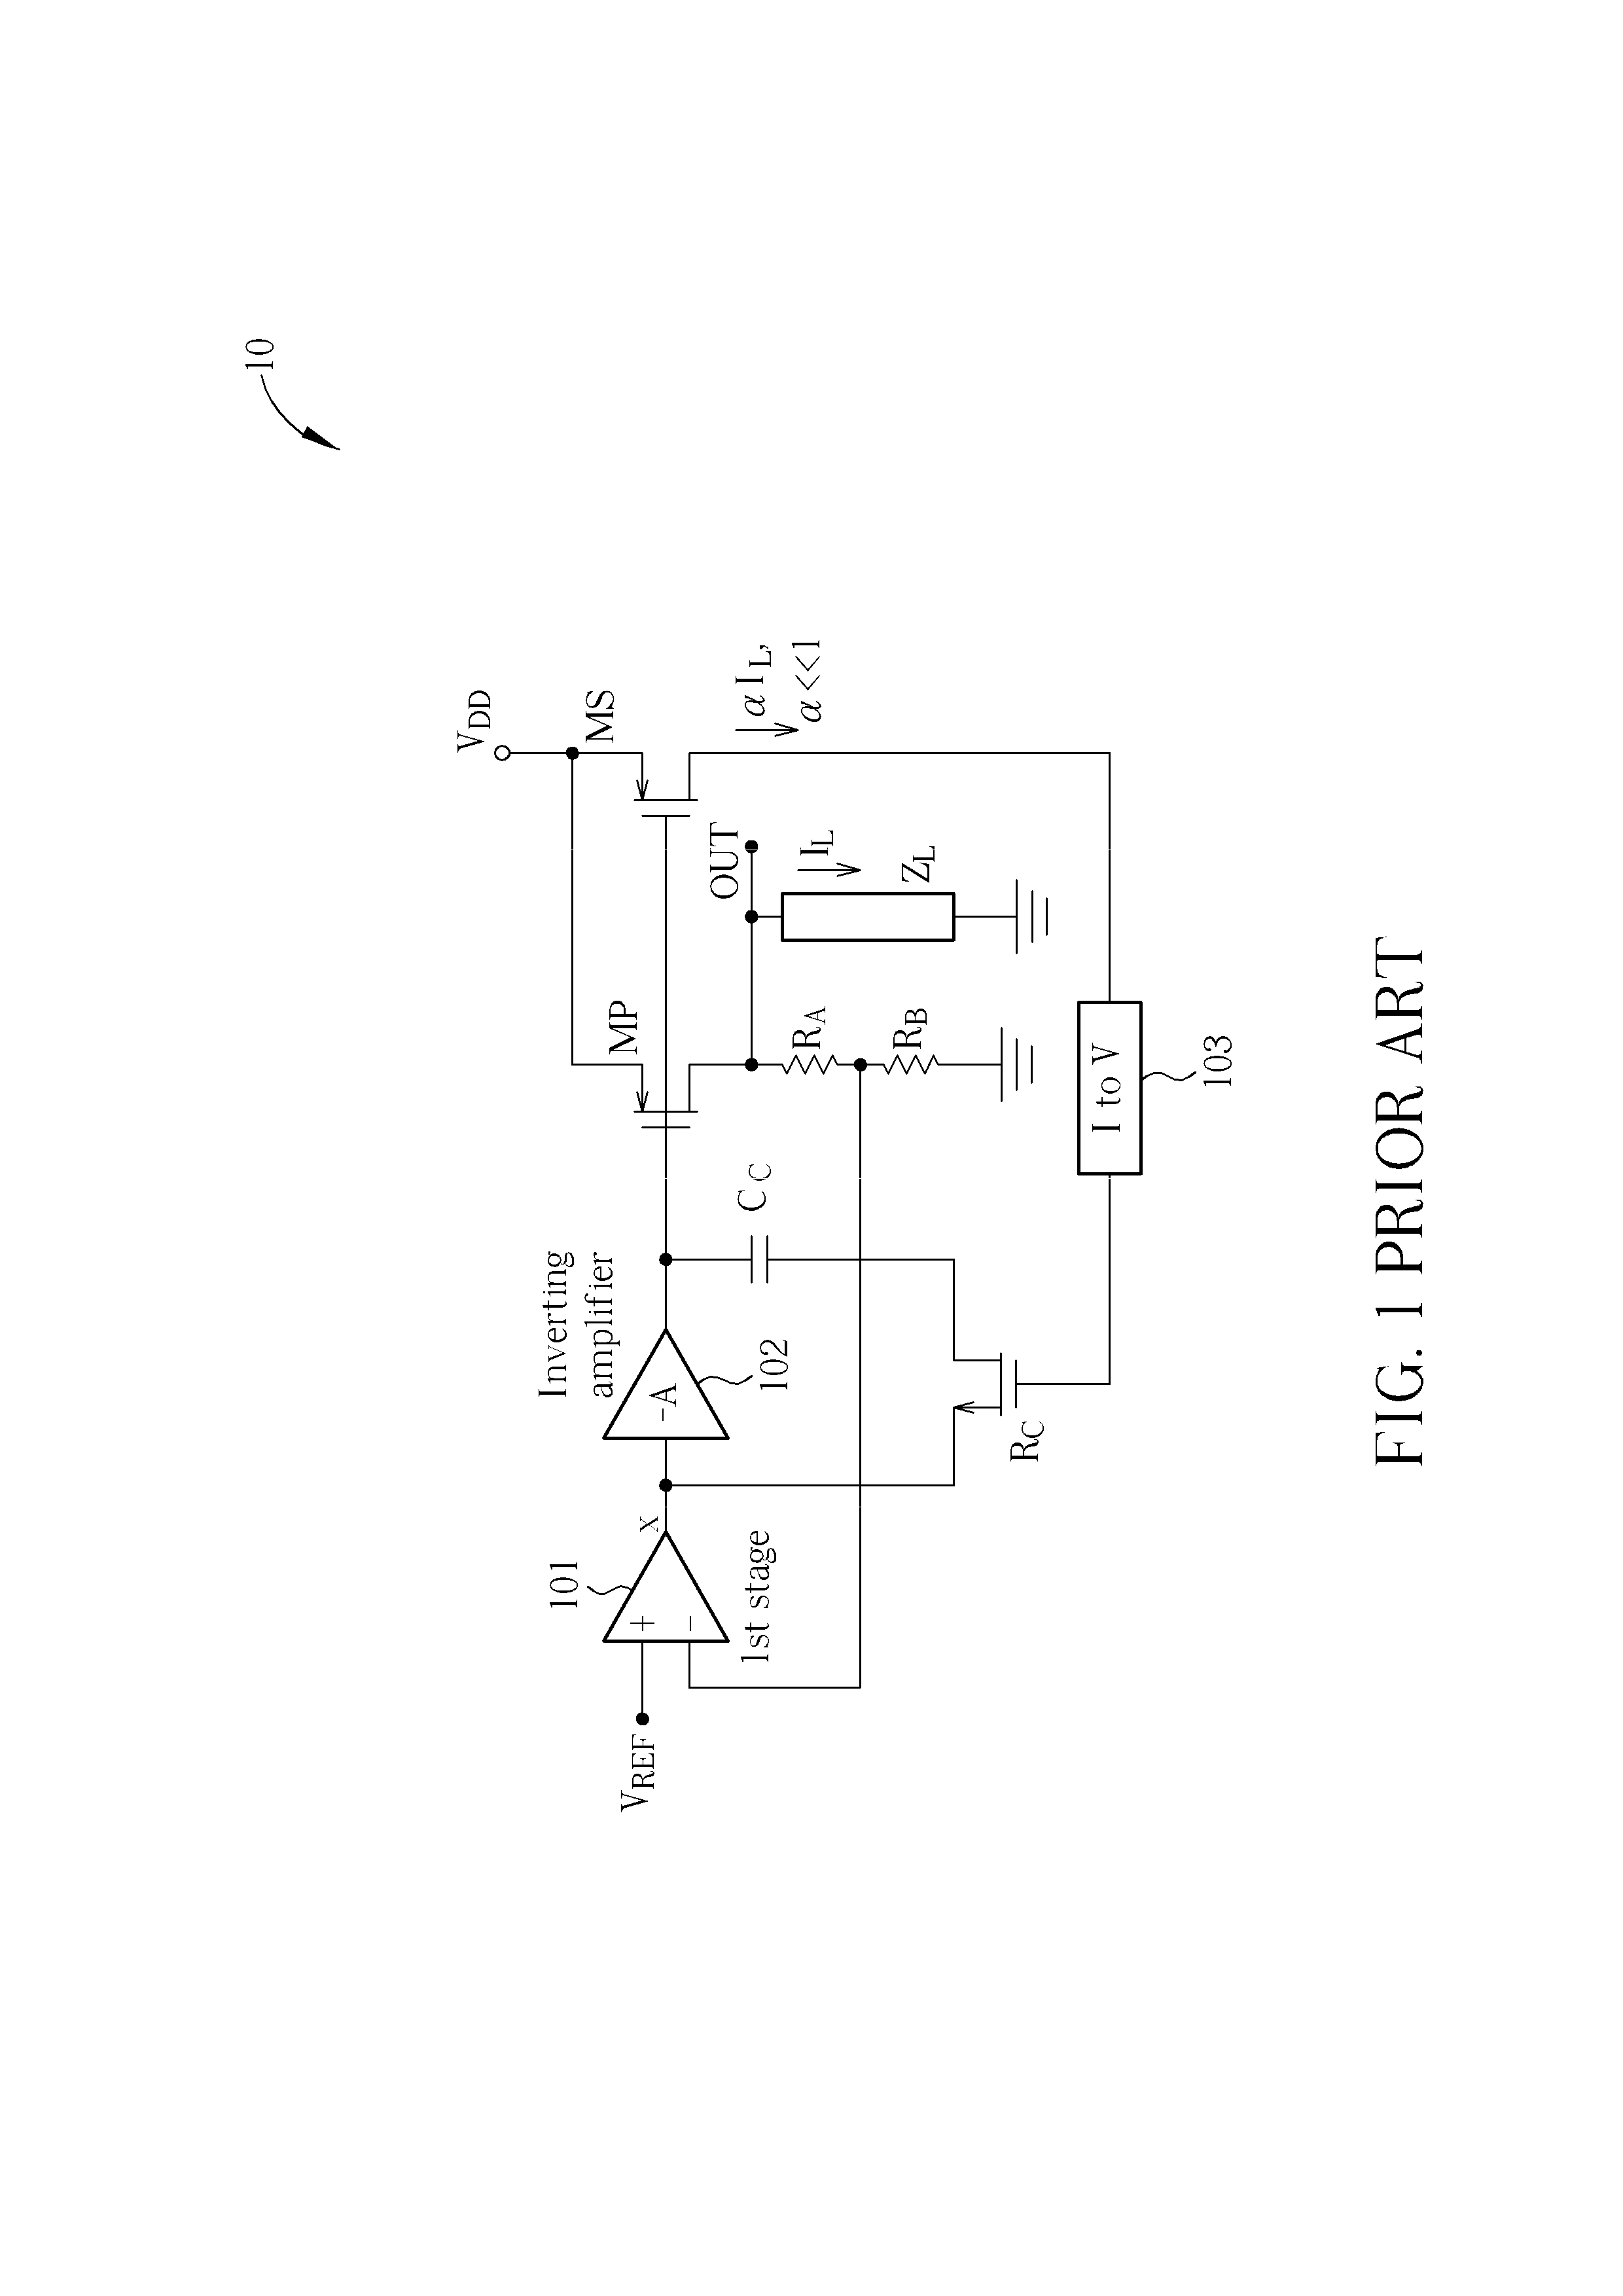 Integrated LDO with Variable Resistive Load